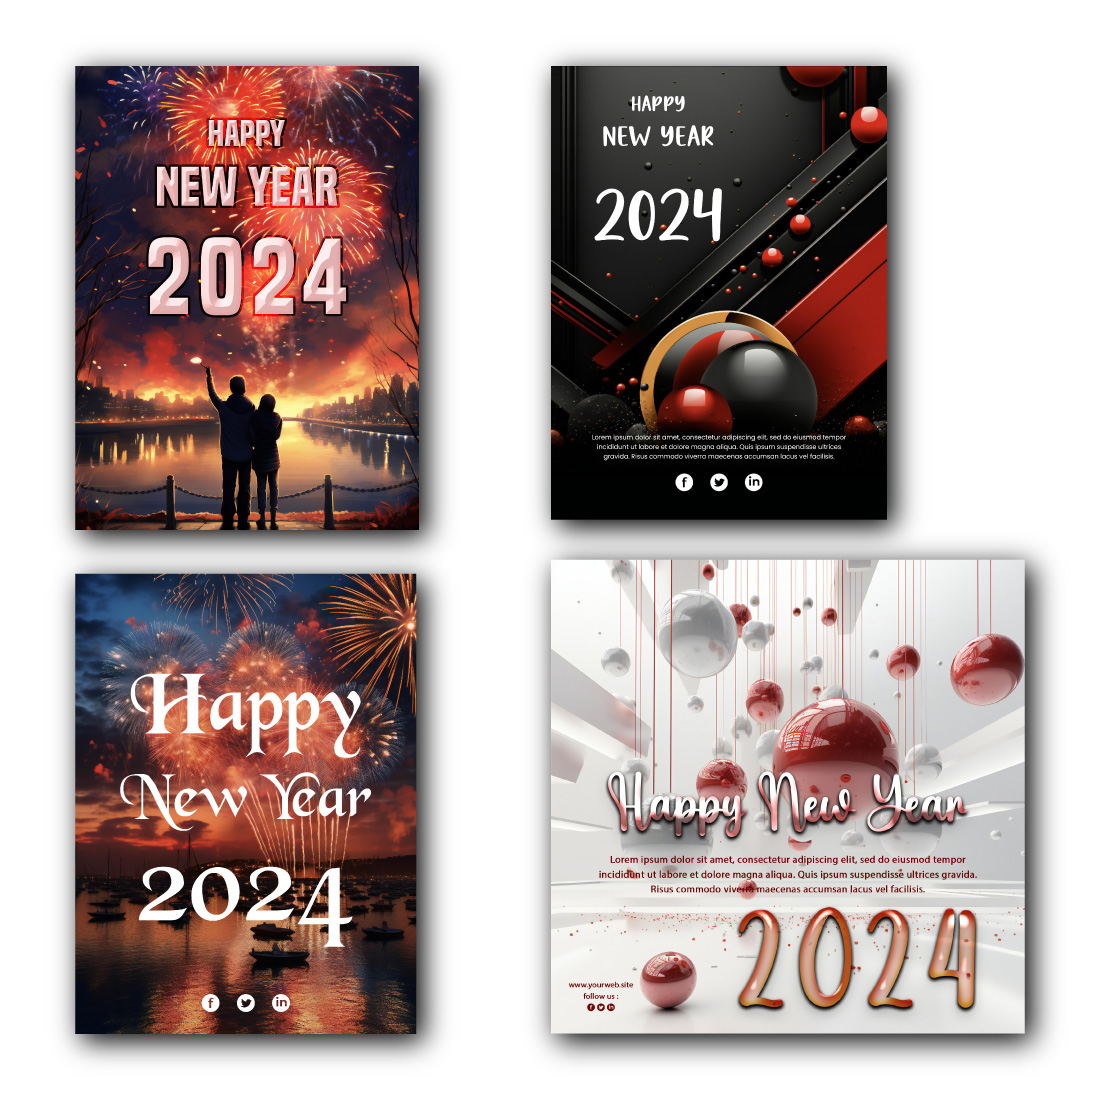 08 Happy new year social media editable psd template preview image.